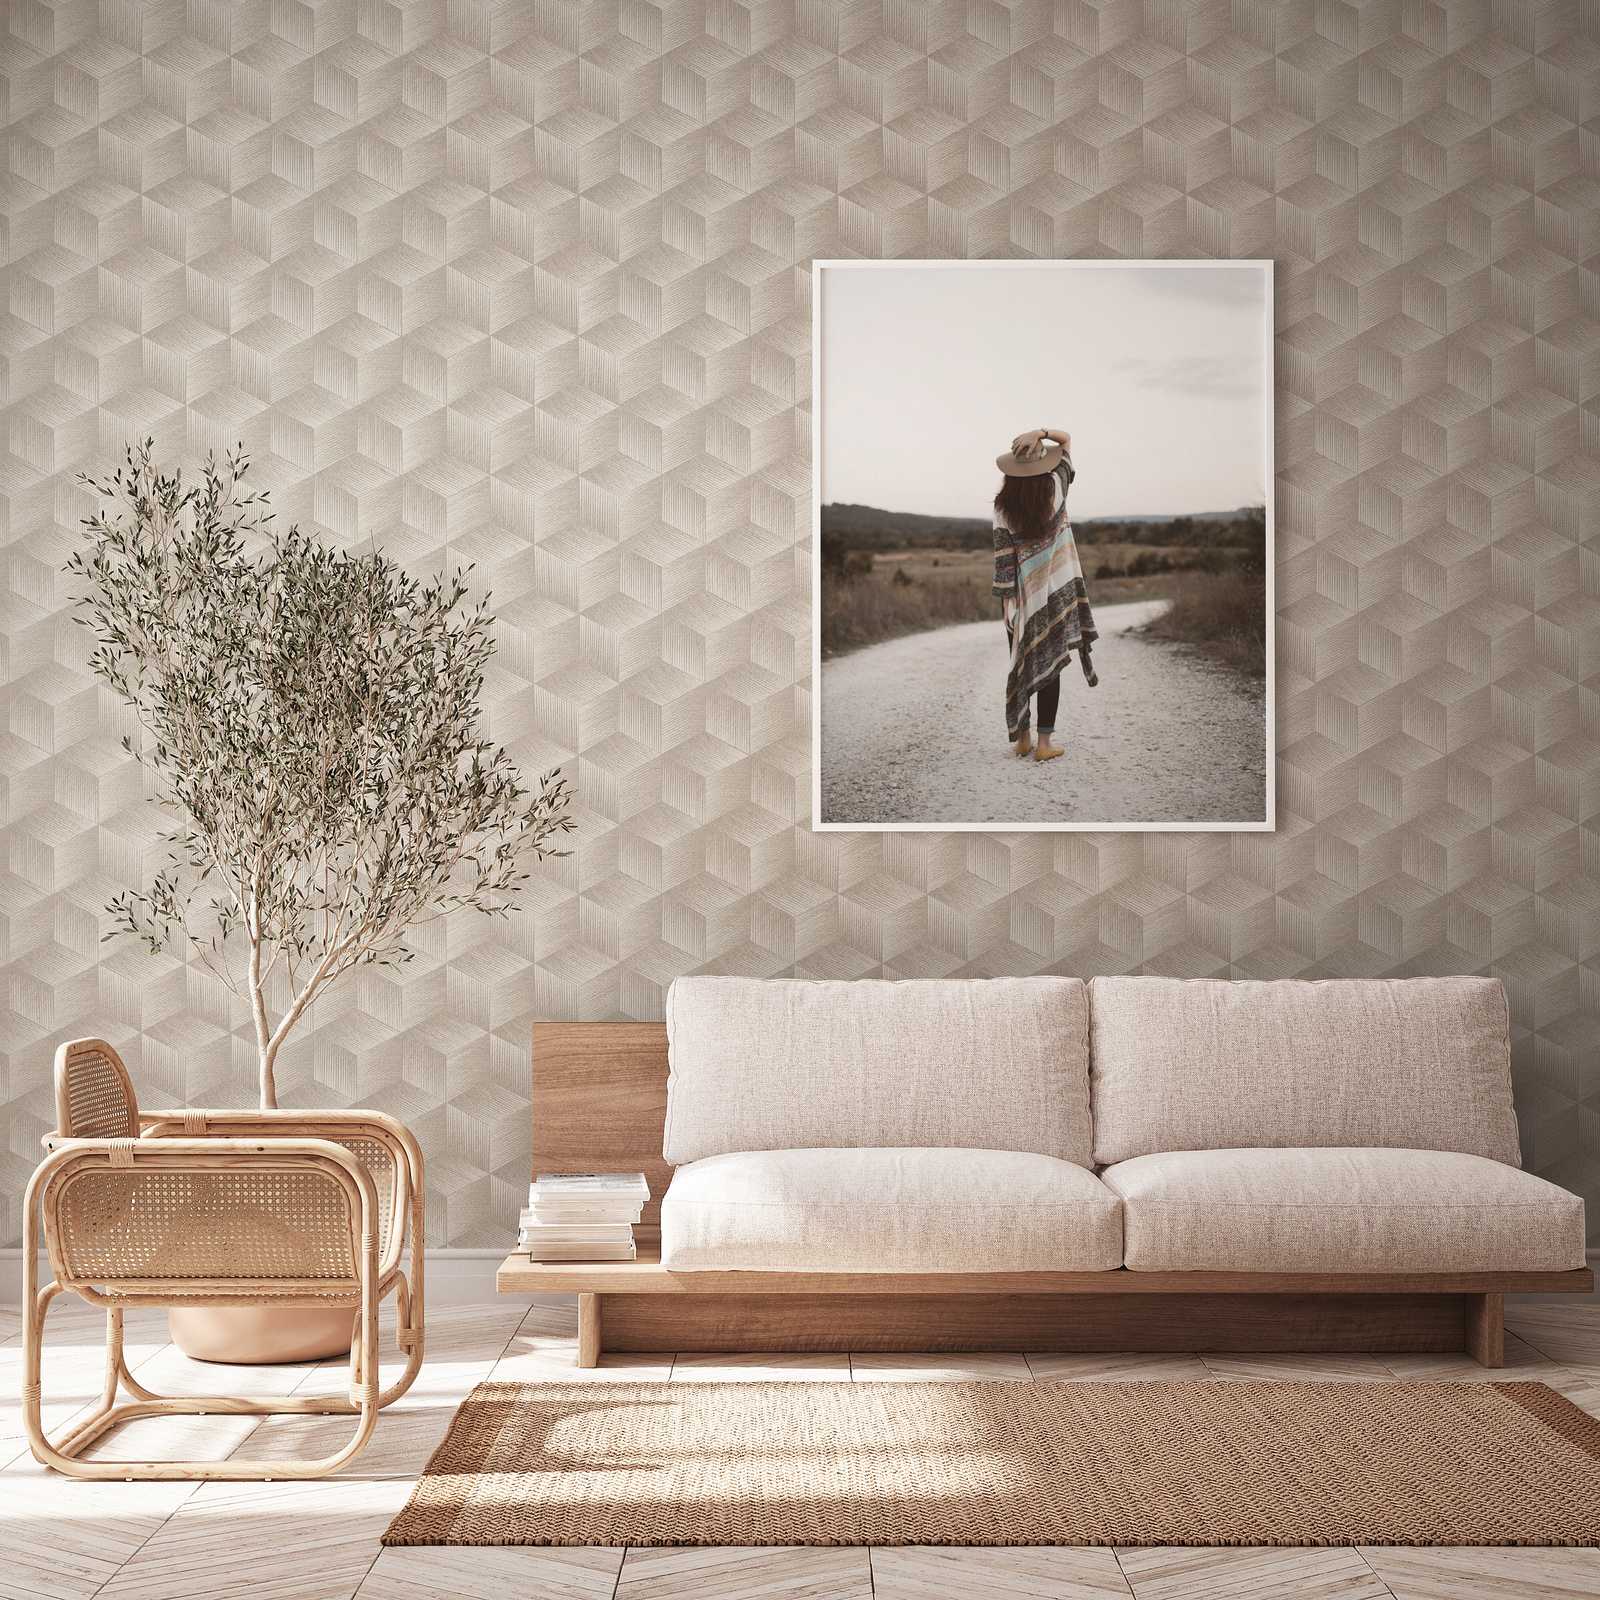             3D-look non-woven wallpaper with square pattern PVC-free - grey, greige, white
        